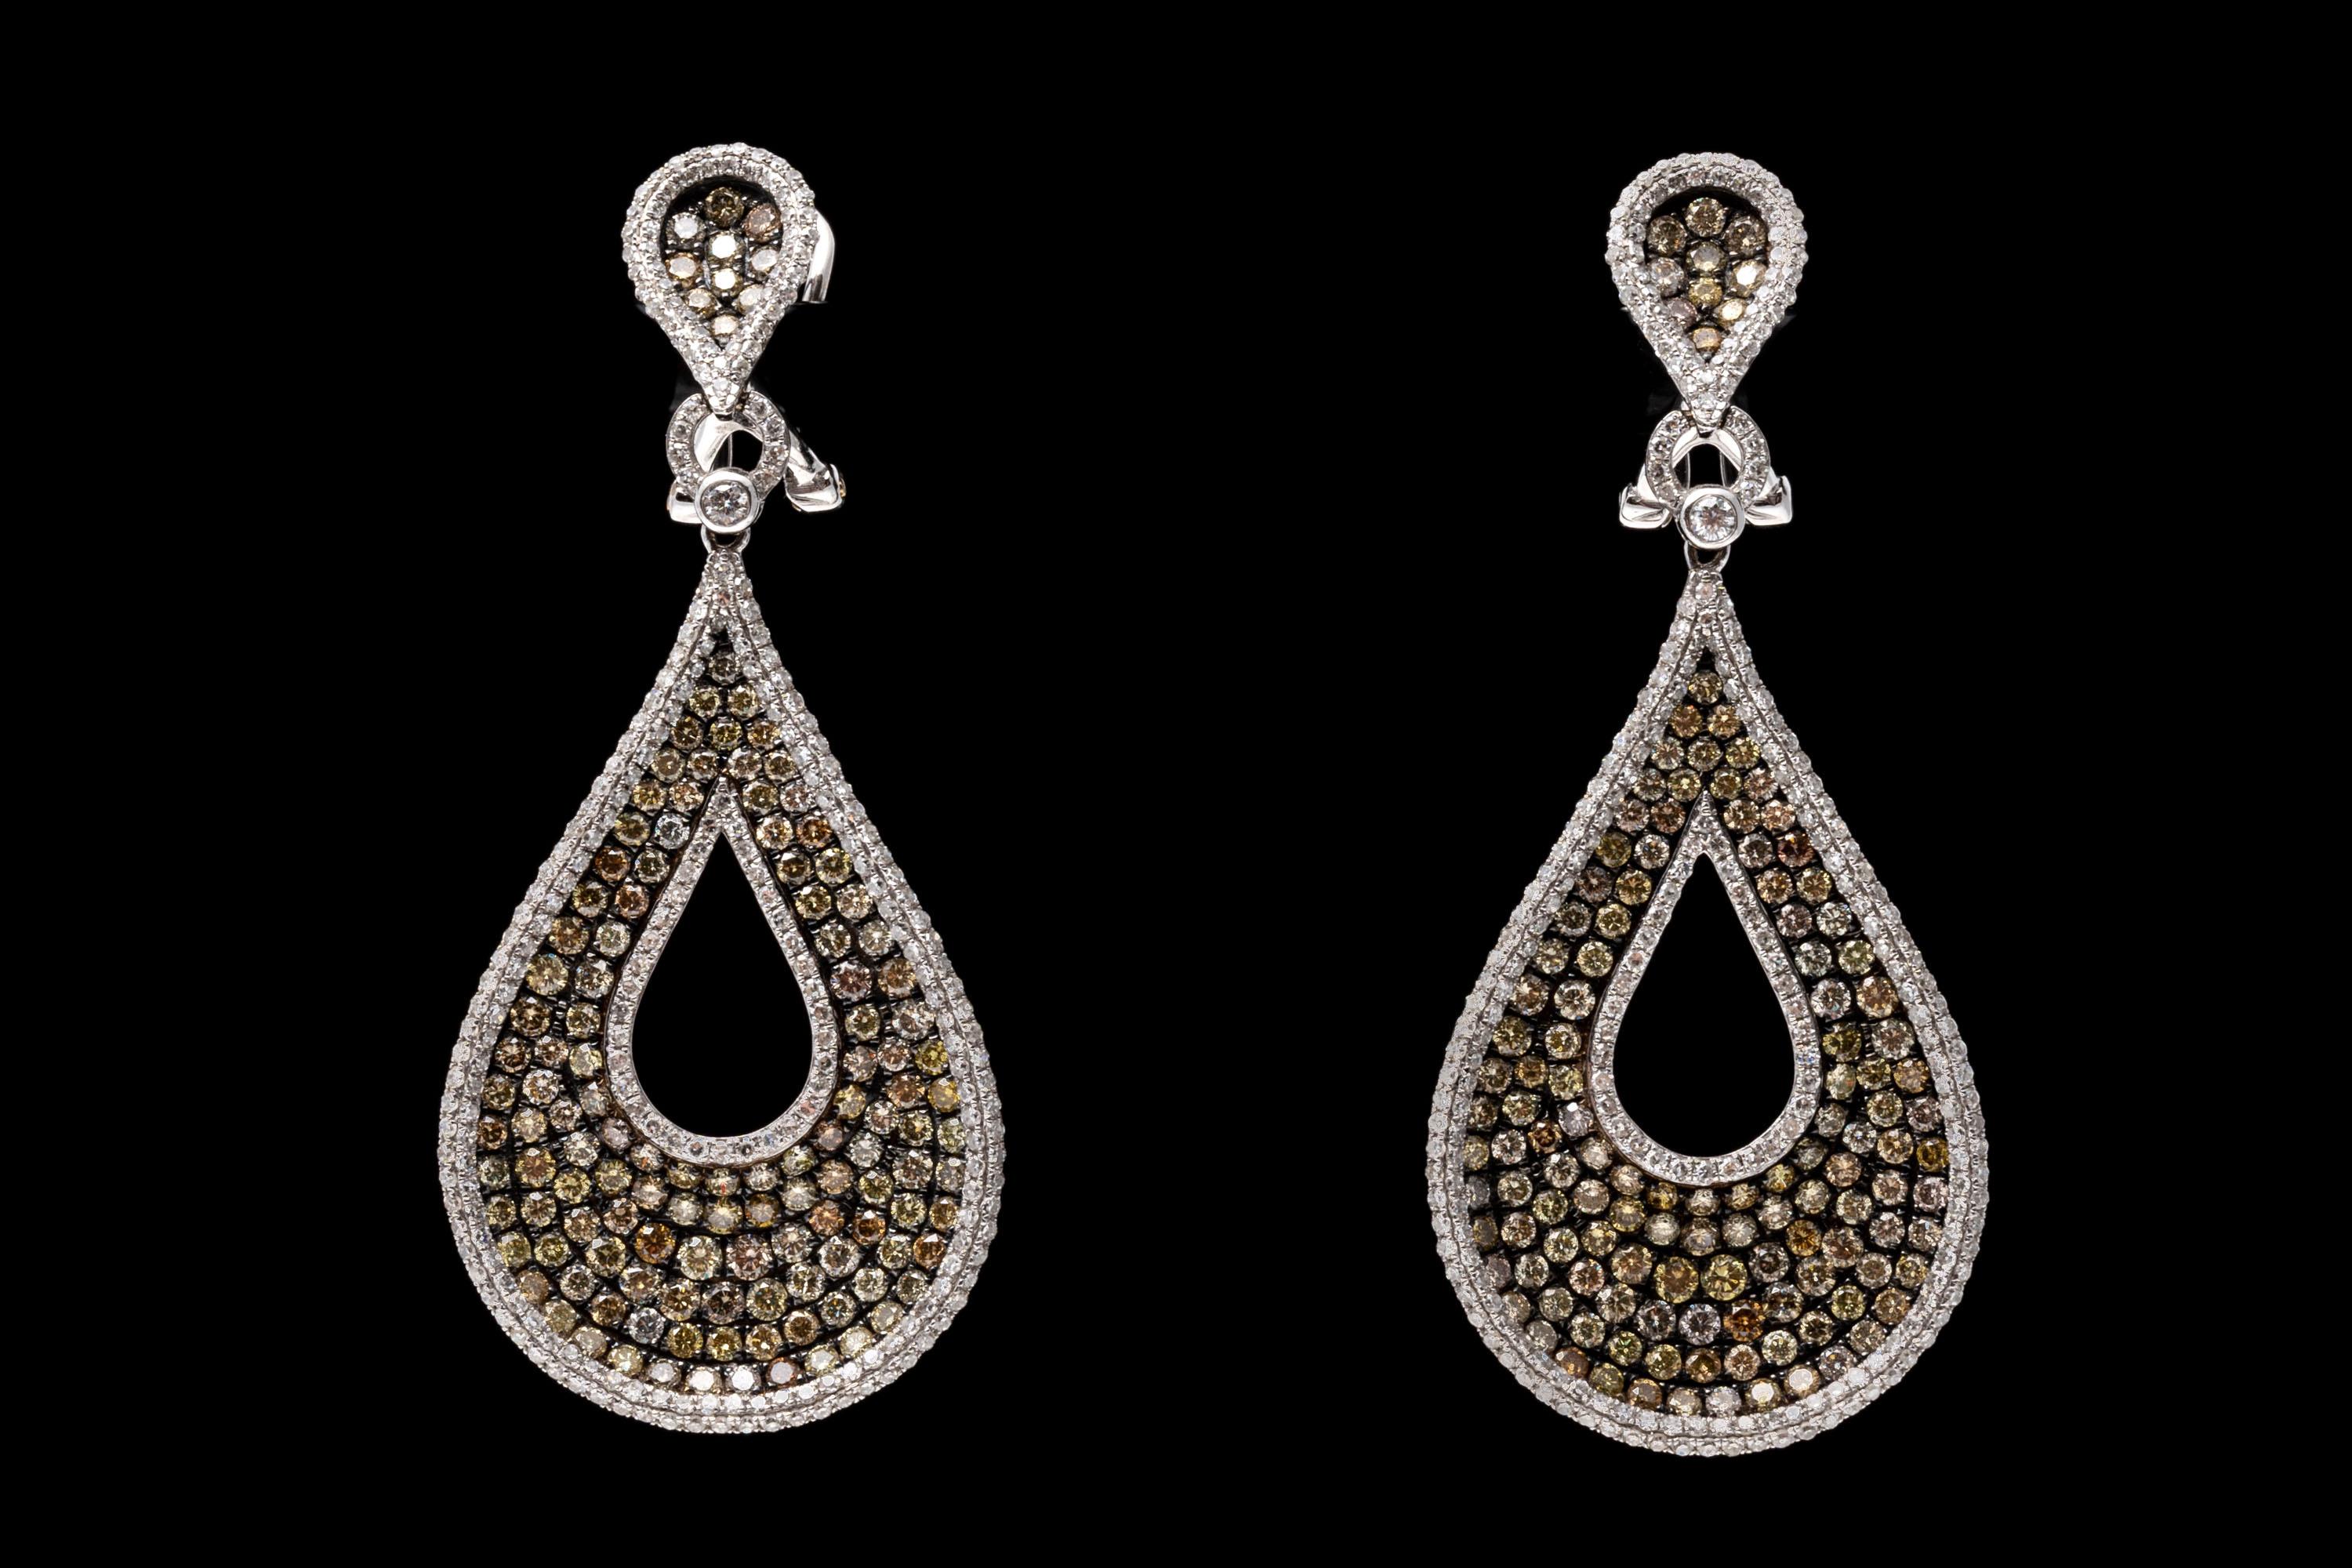 18k White Gold and Colored Diamond Spectacular Pendant Earrings, App. 6.00 TCW For Sale 1